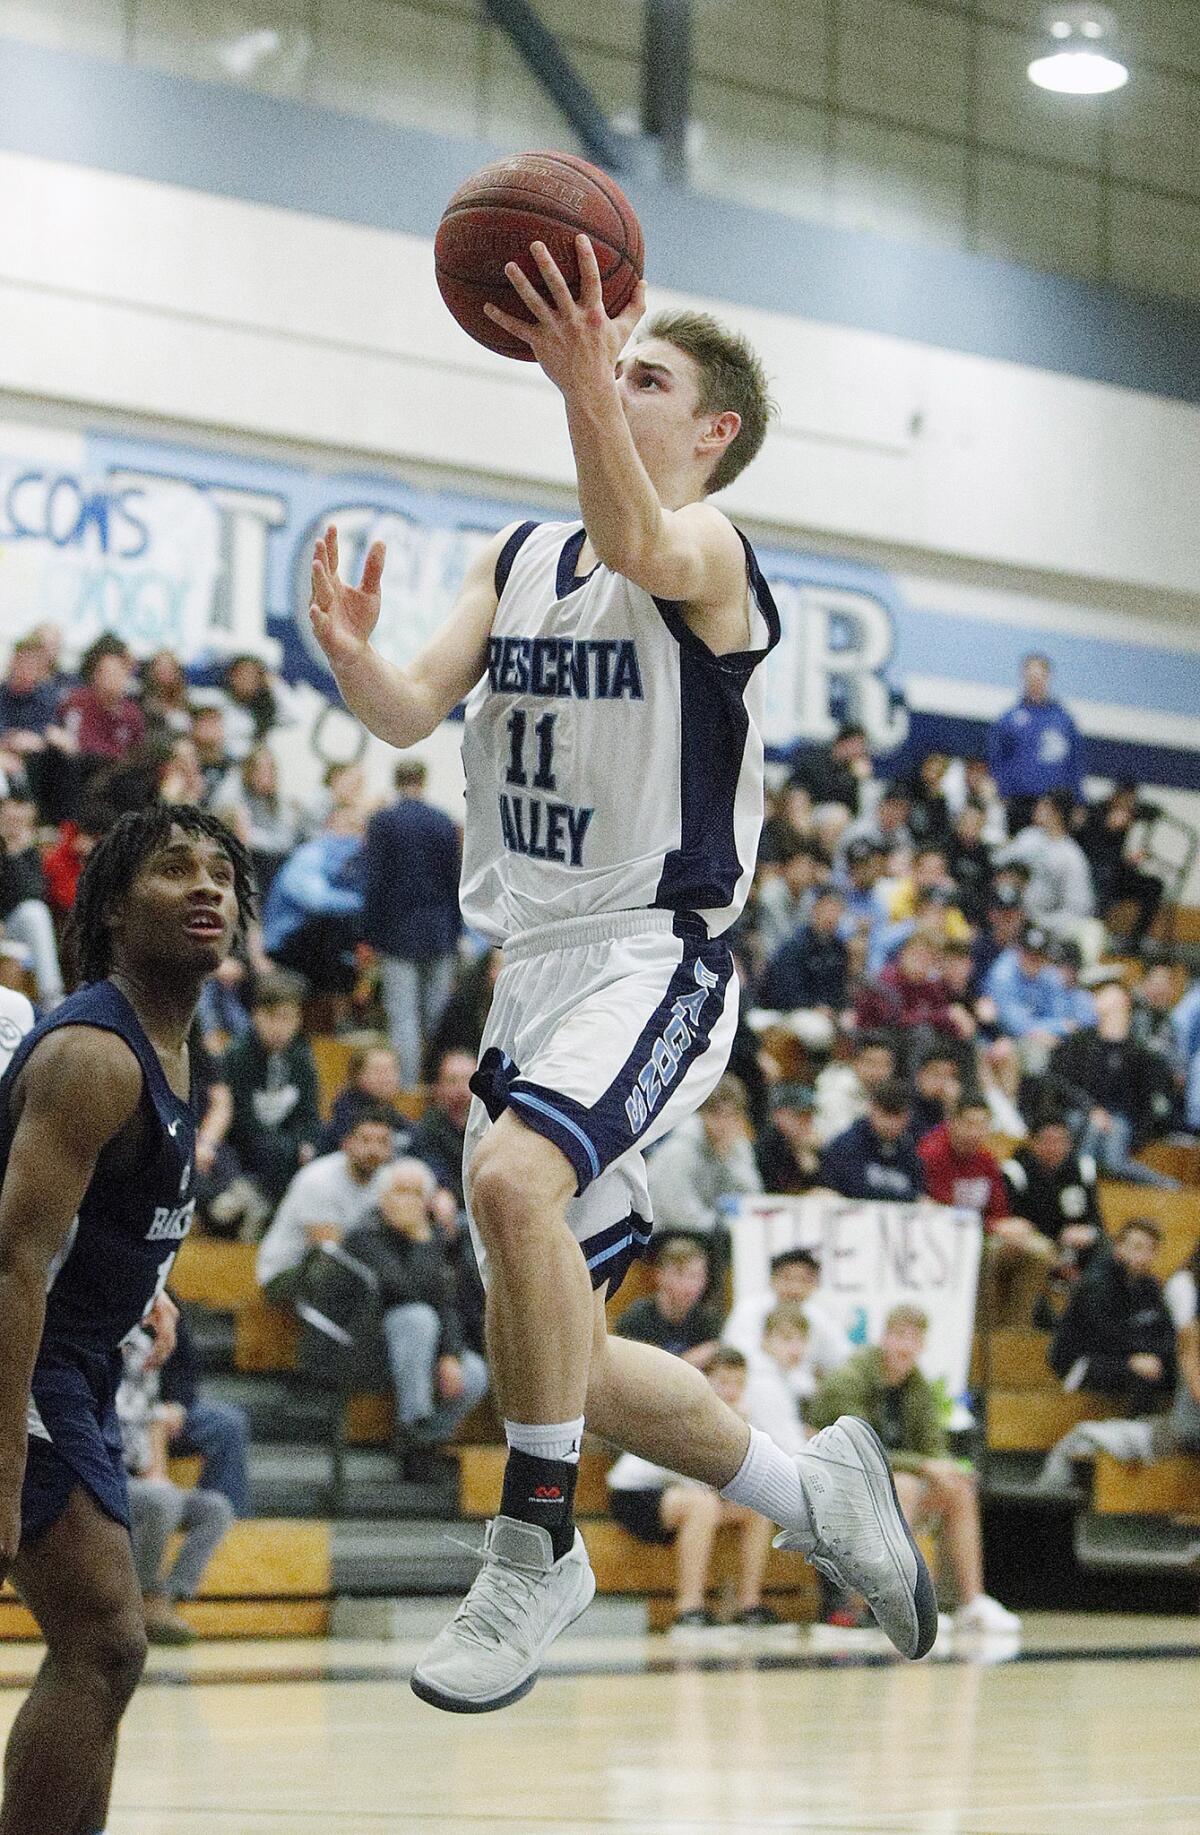 Crescenta Valley High boys' basketball player Tyler Carlson was named the Pacific League's co-Most Valuable player after averaging 22.1 points per game this season.